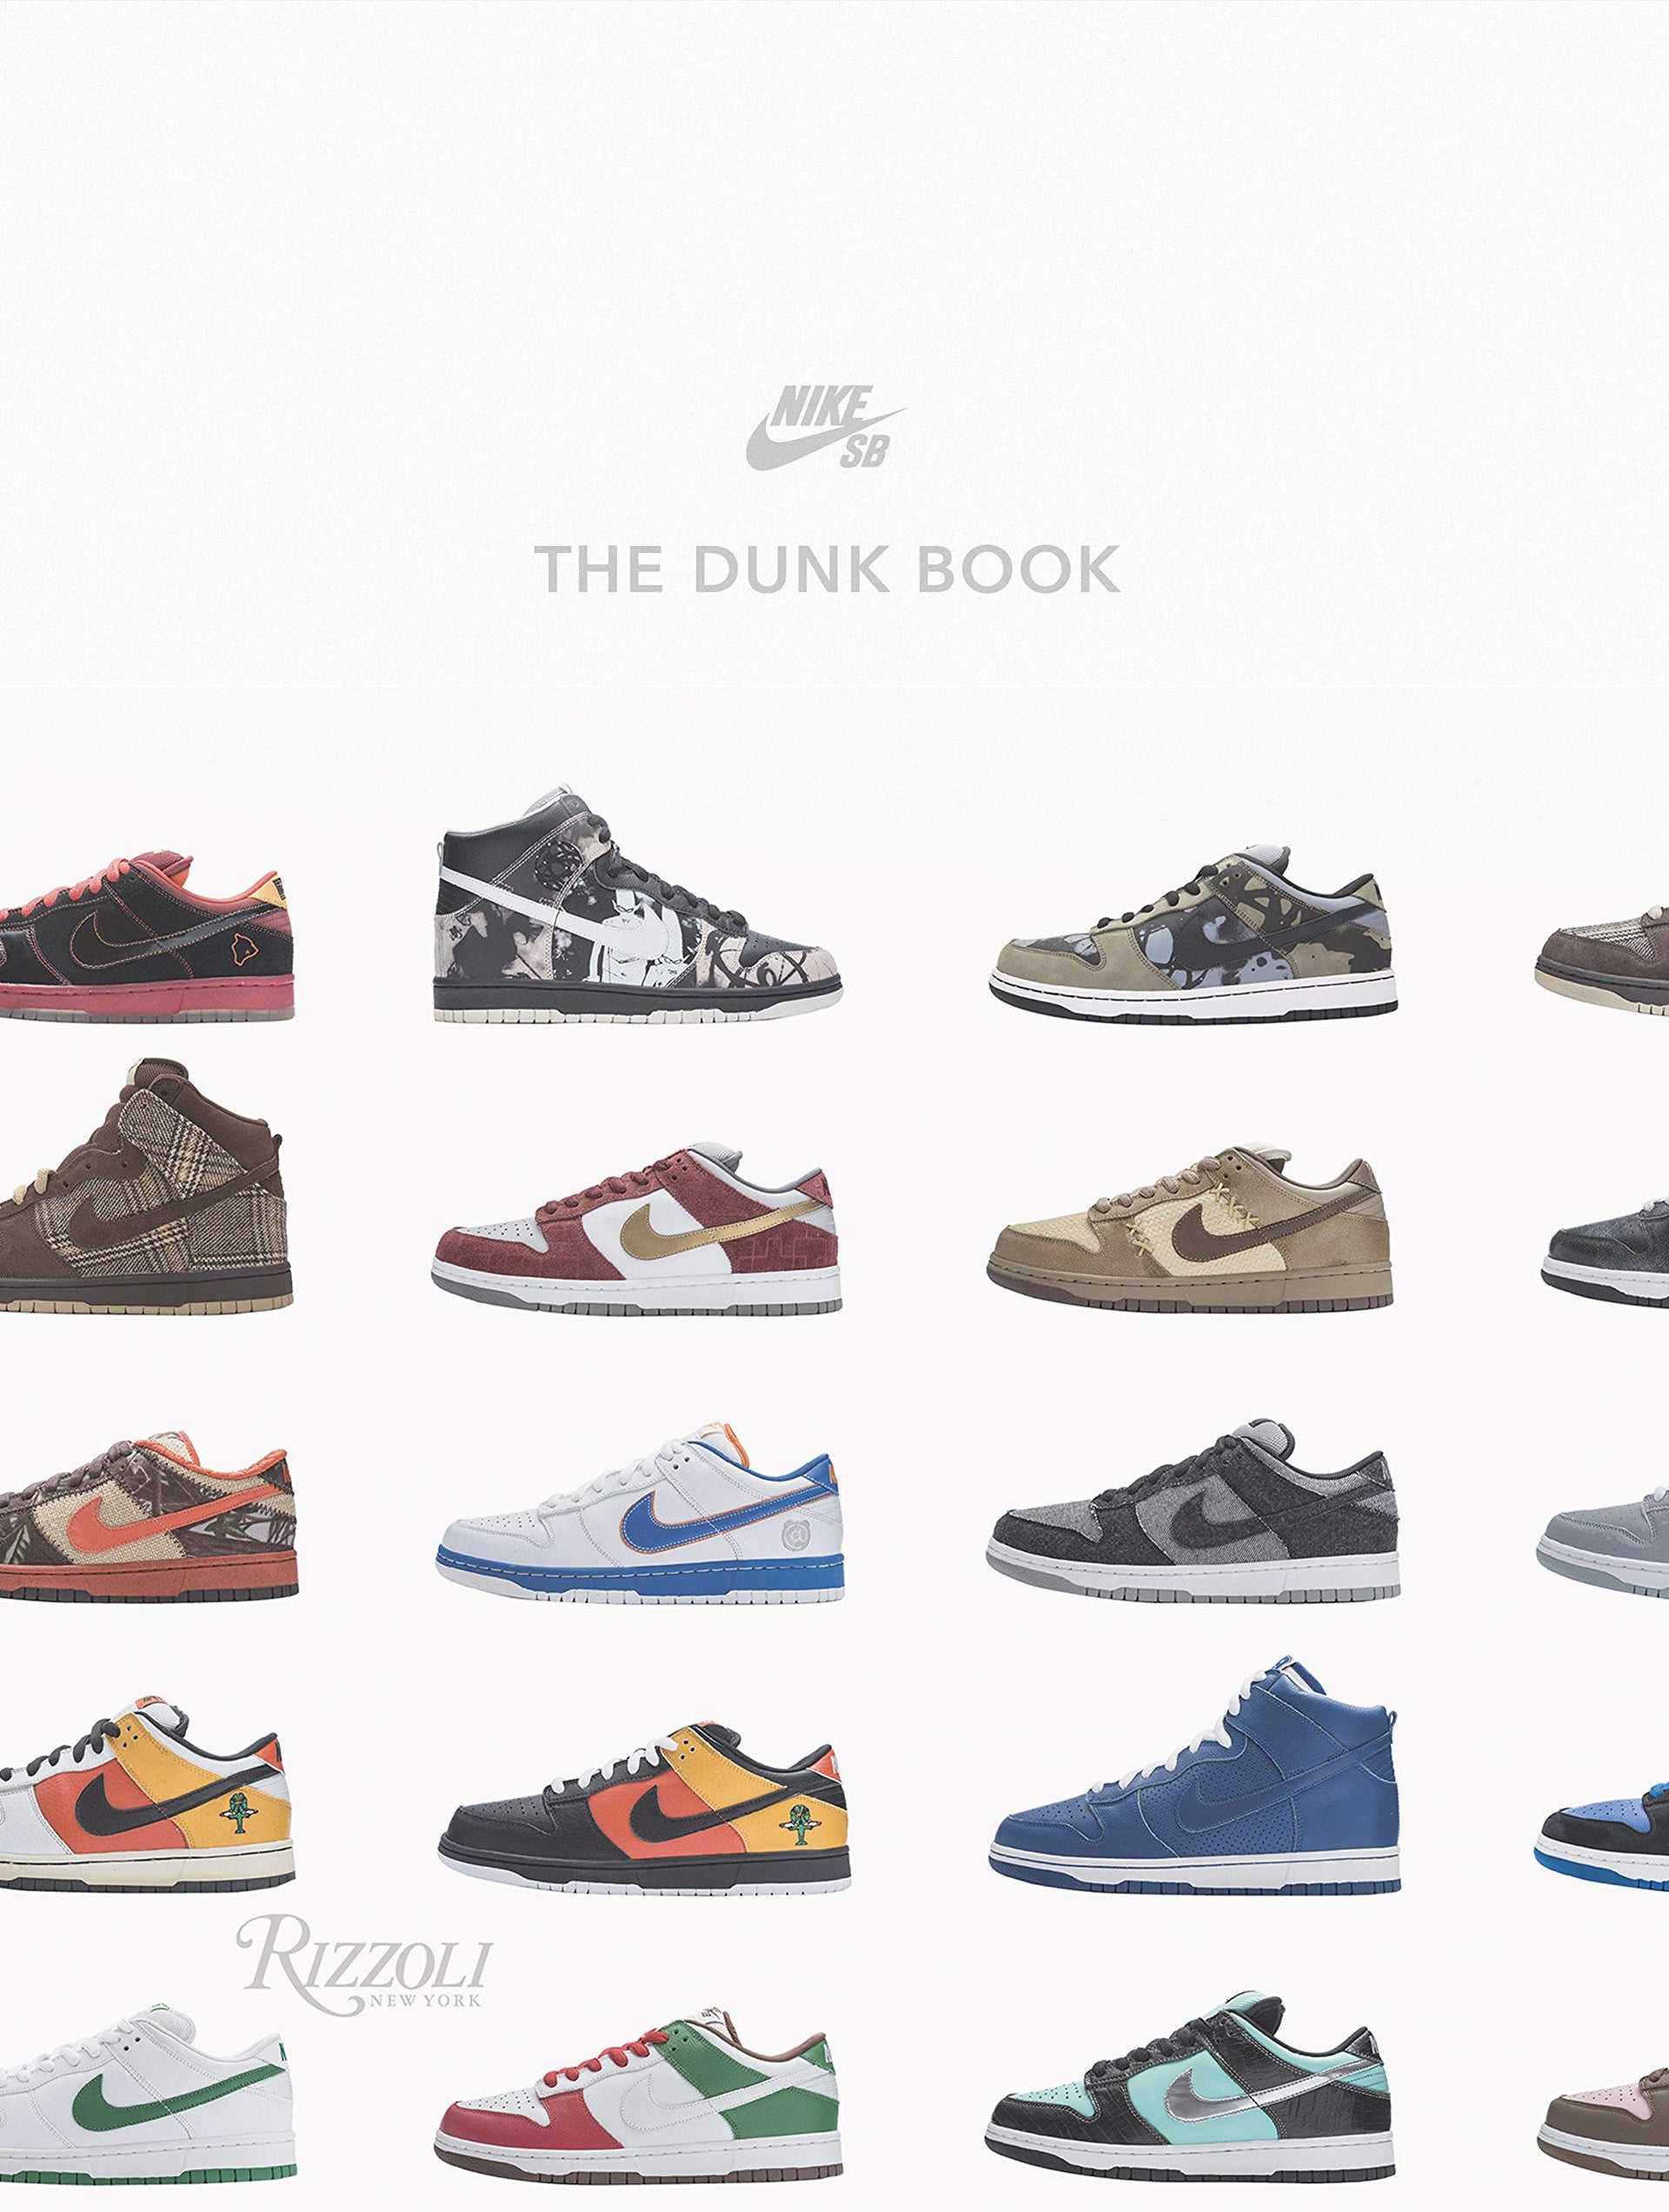 The Dunk Book